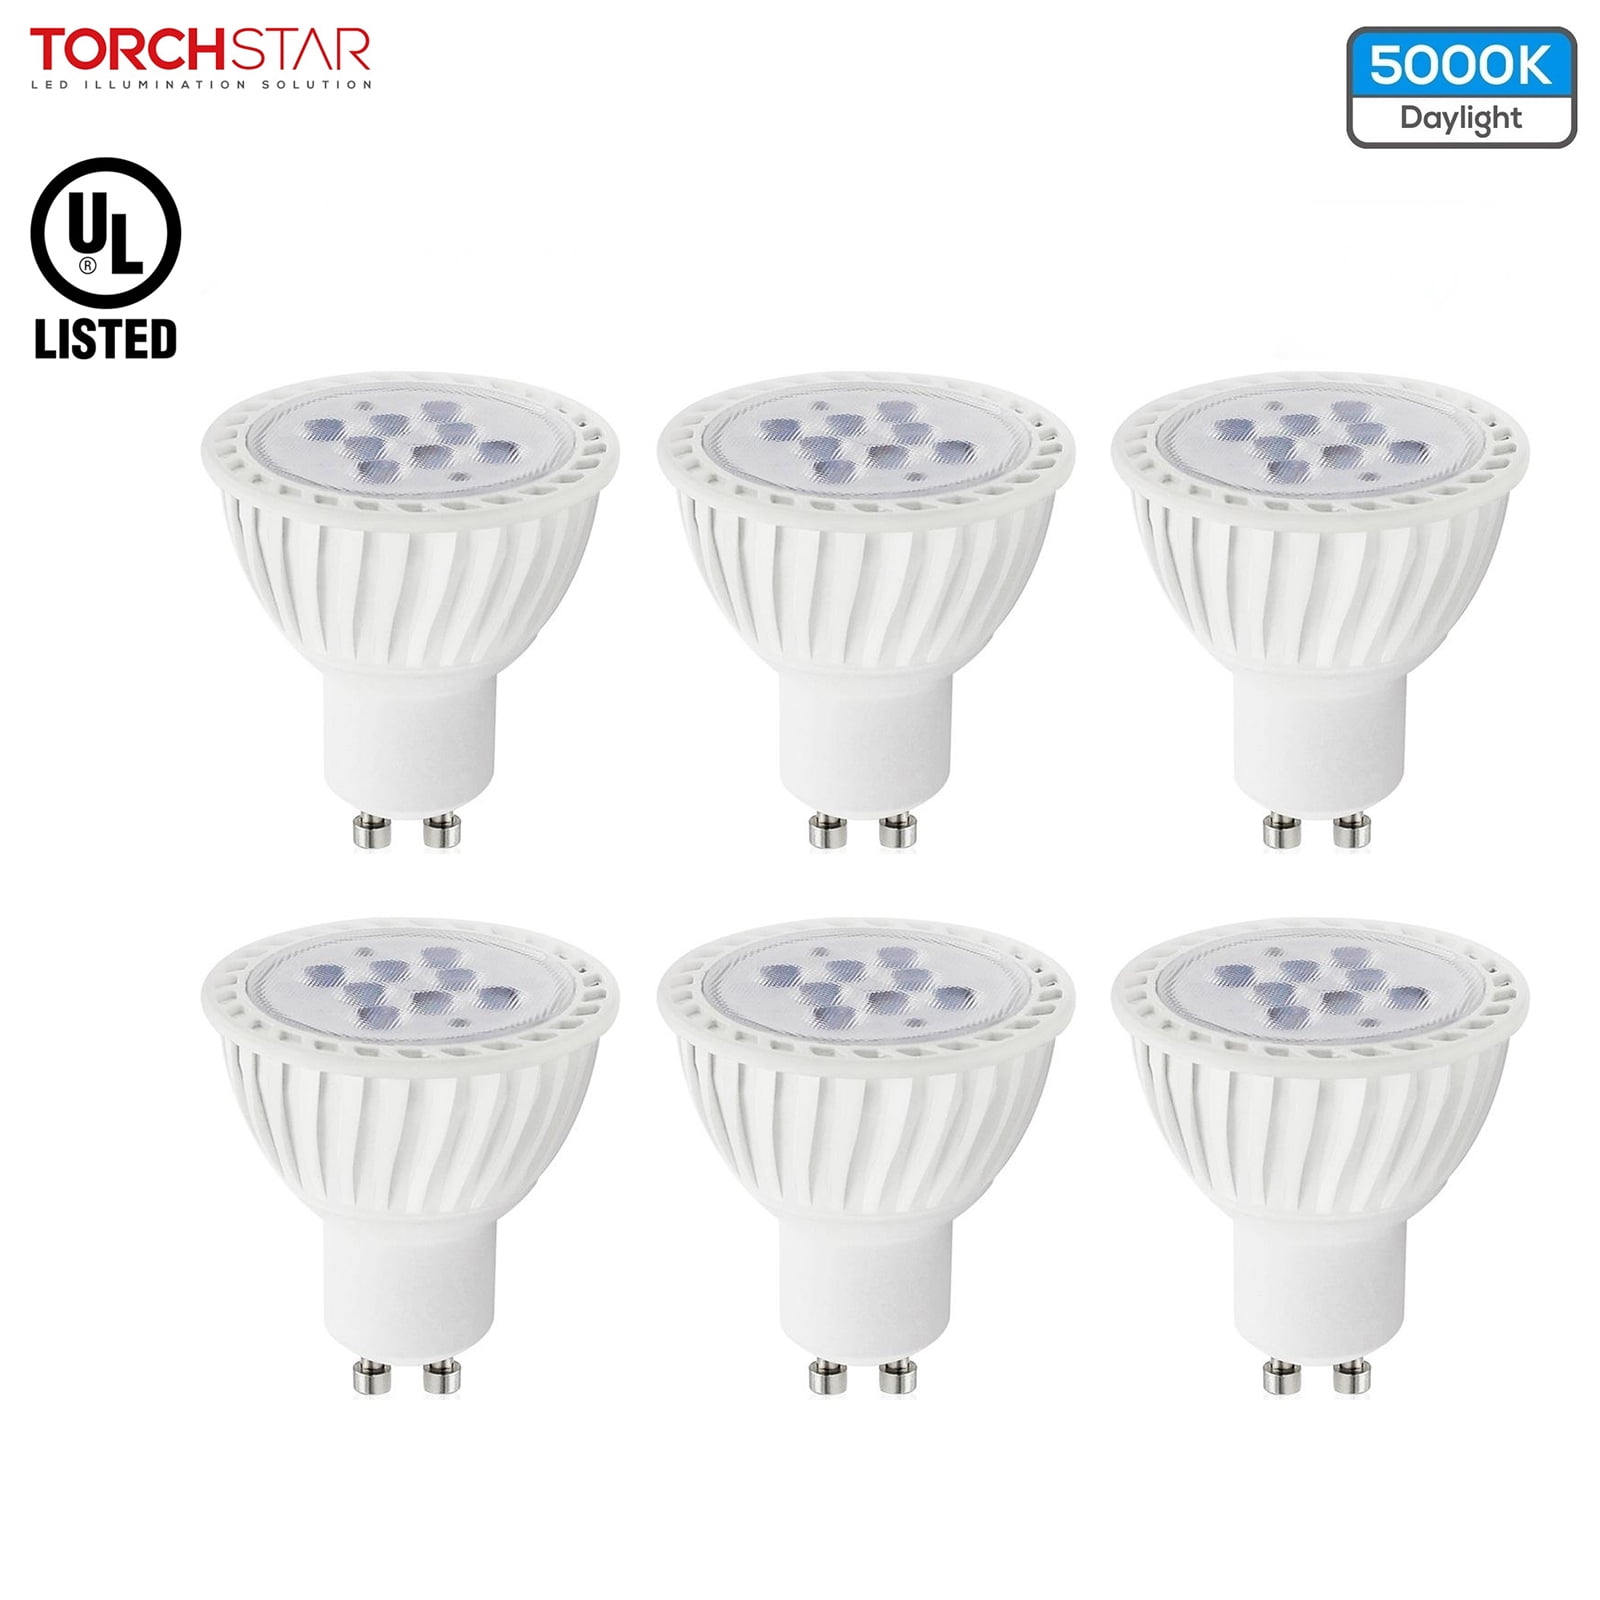 TORCHSTAR MR16 LED GU10 Base Bulb for Track Lighting, Recessed Non-Dimmable, 7W (60W Equivalent), 5000K Daylight, 36° Beam 500Lm, UL-Listed, 2 Years Warranty, Pack of 6 - Walmart.com